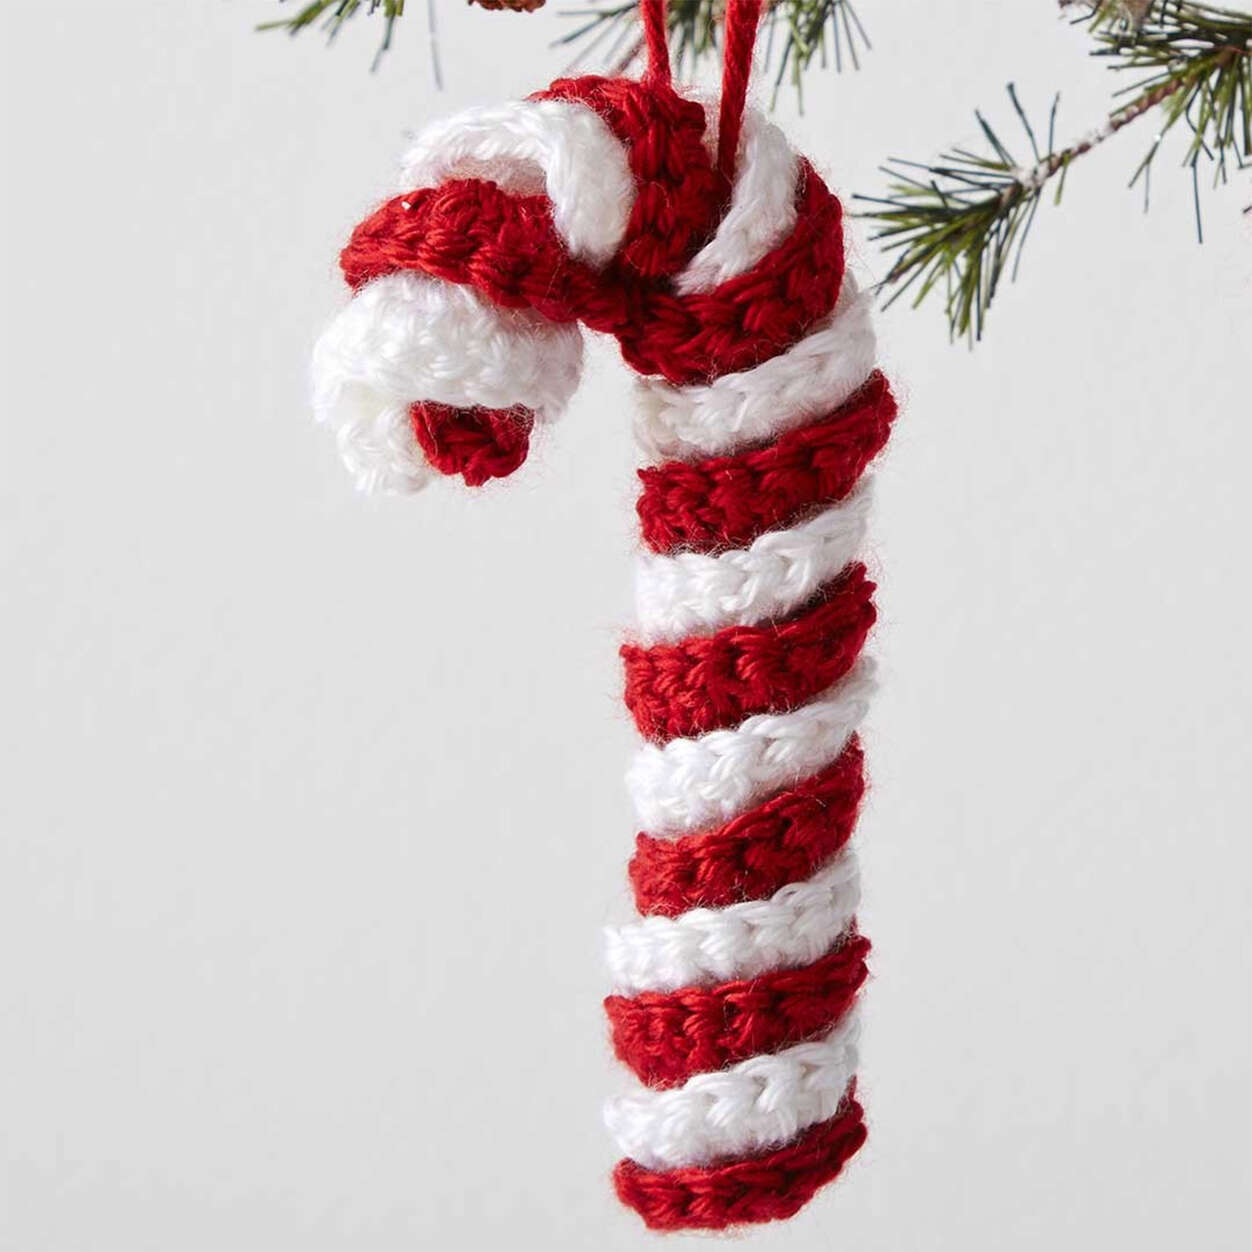 Candy Cane Ornament - Free Crochet Pattern